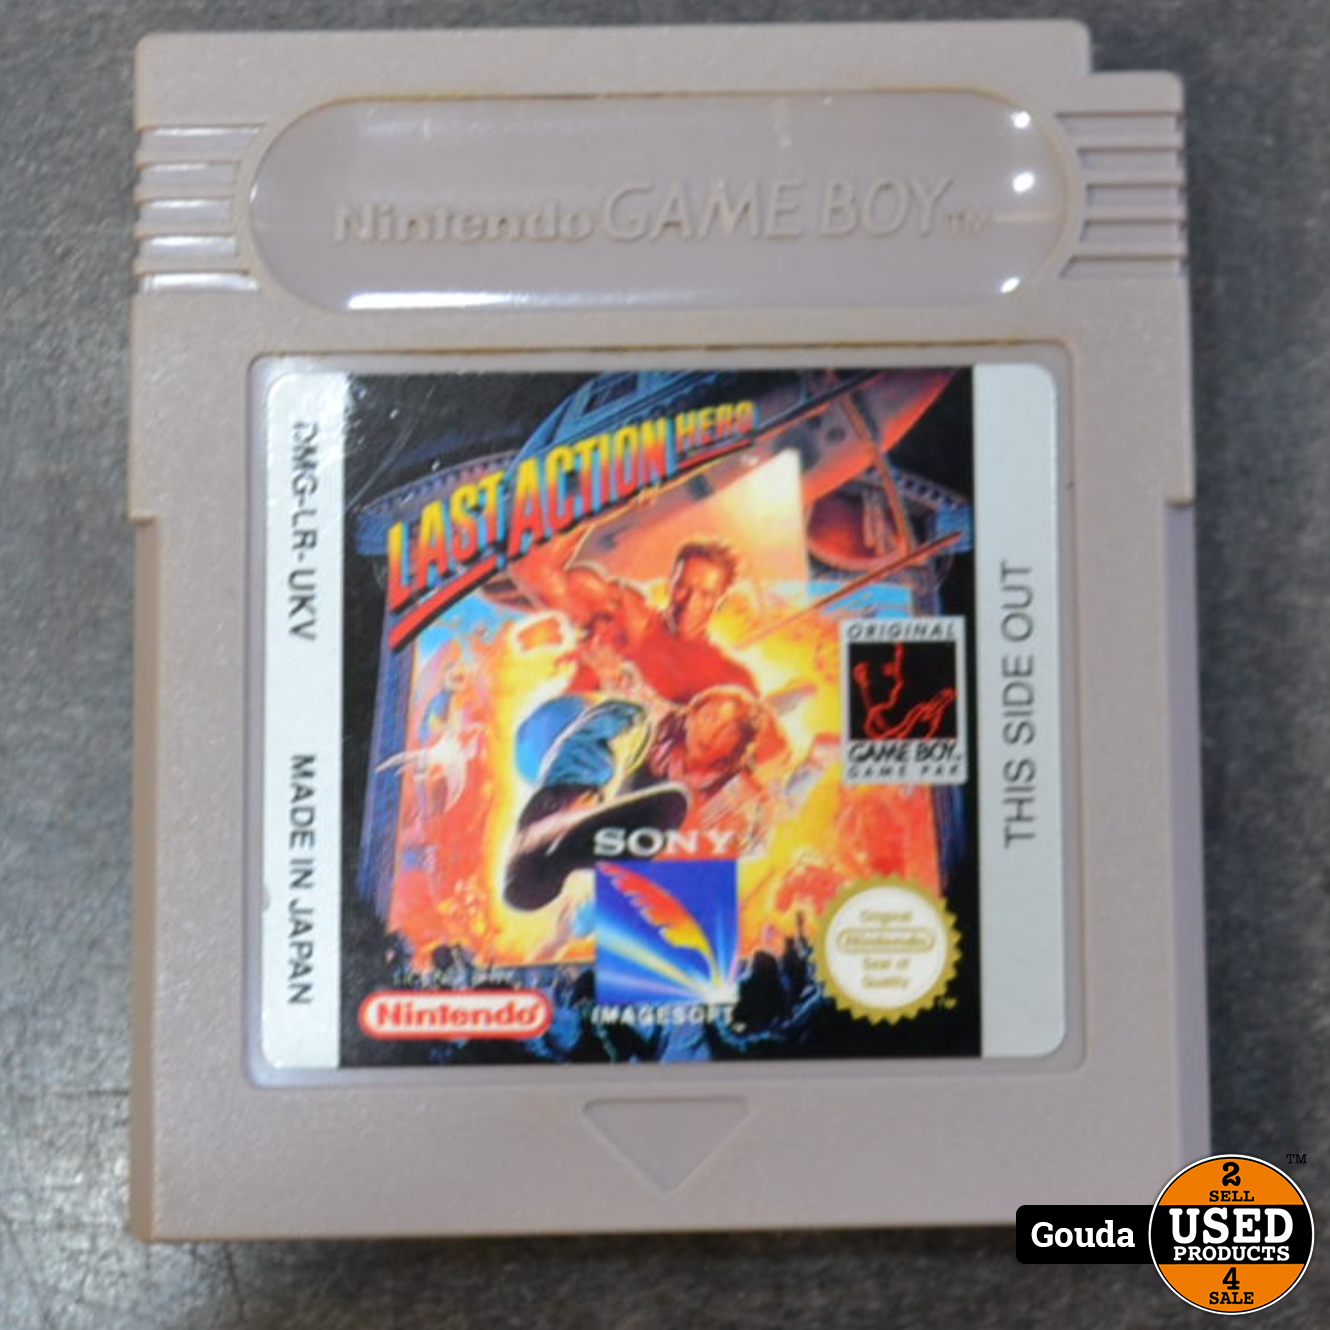 Gameboy Last action hero - Used Products